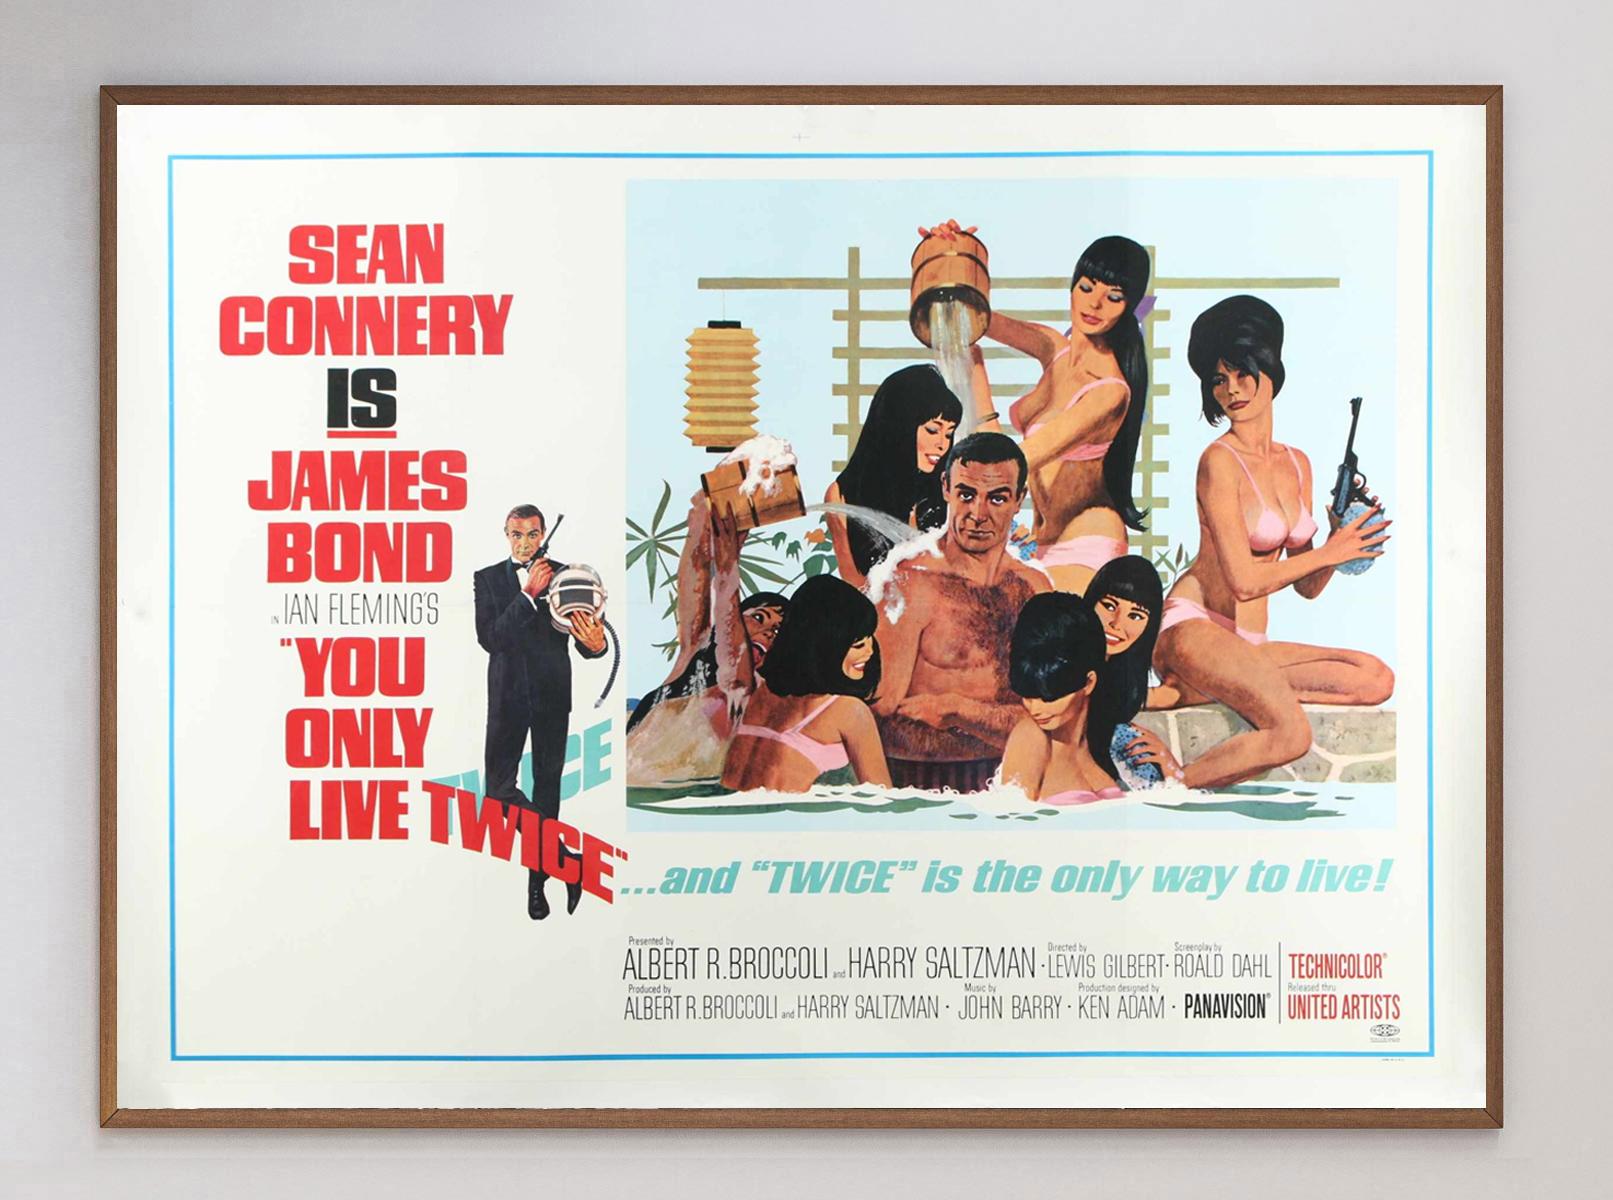 Released in 1967, You Only Live Twice is the fifth outing of Sean Connery as James Bond. One of the absolutely quintessential Bond films, it features the first appearance of Blofeld and was written for the screen by Roald Dahl (loosely based off the